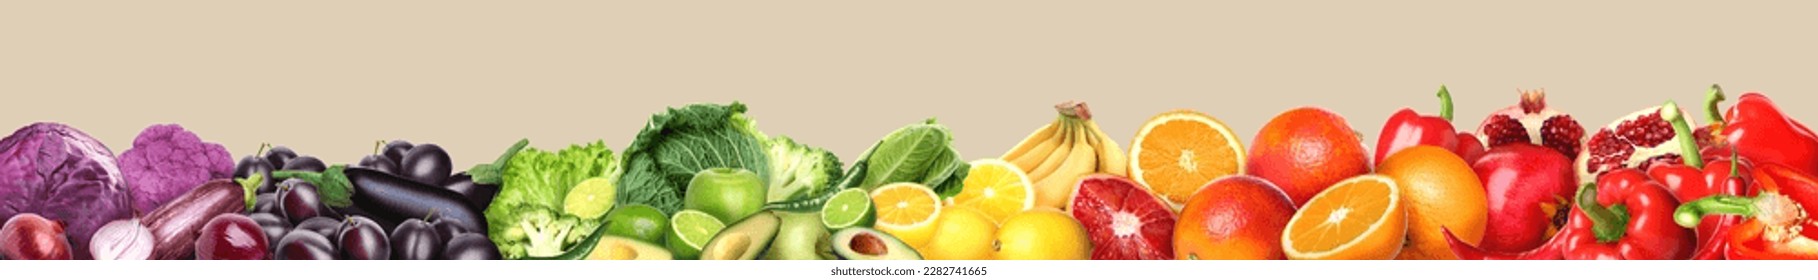 Many different fresh fruits and vegetables on beige background. Banner design - Shutterstock ID 2282741665